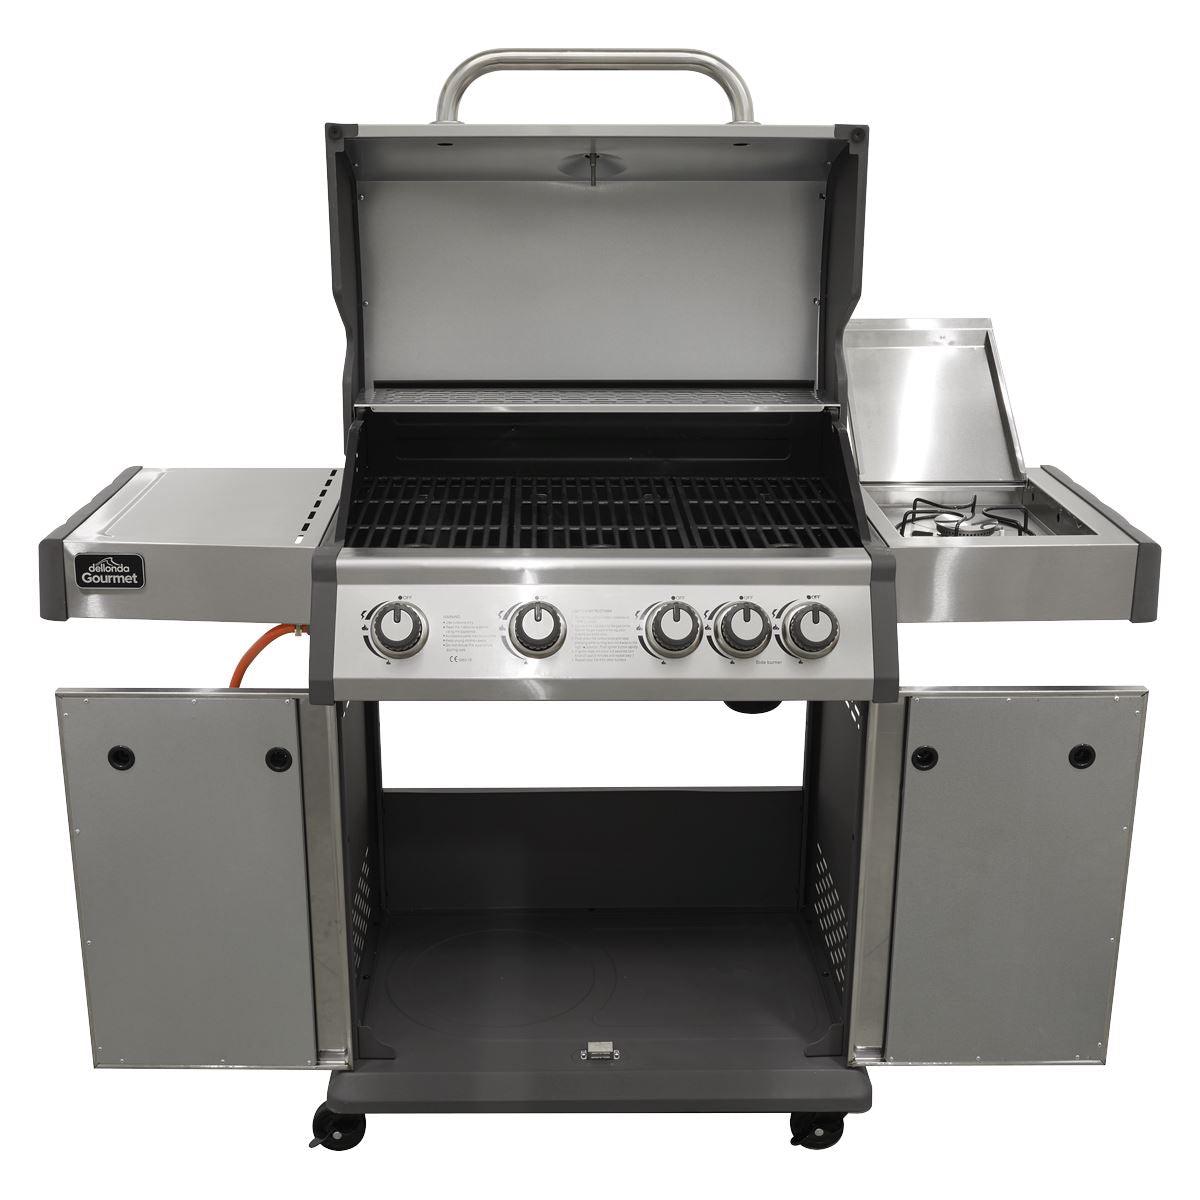 Dellonda 4+1 Burner Deluxe Gas BBQ Grill, Stainless Steel, Side Burner, Ignition DG17 - Tools 2U Direct SW